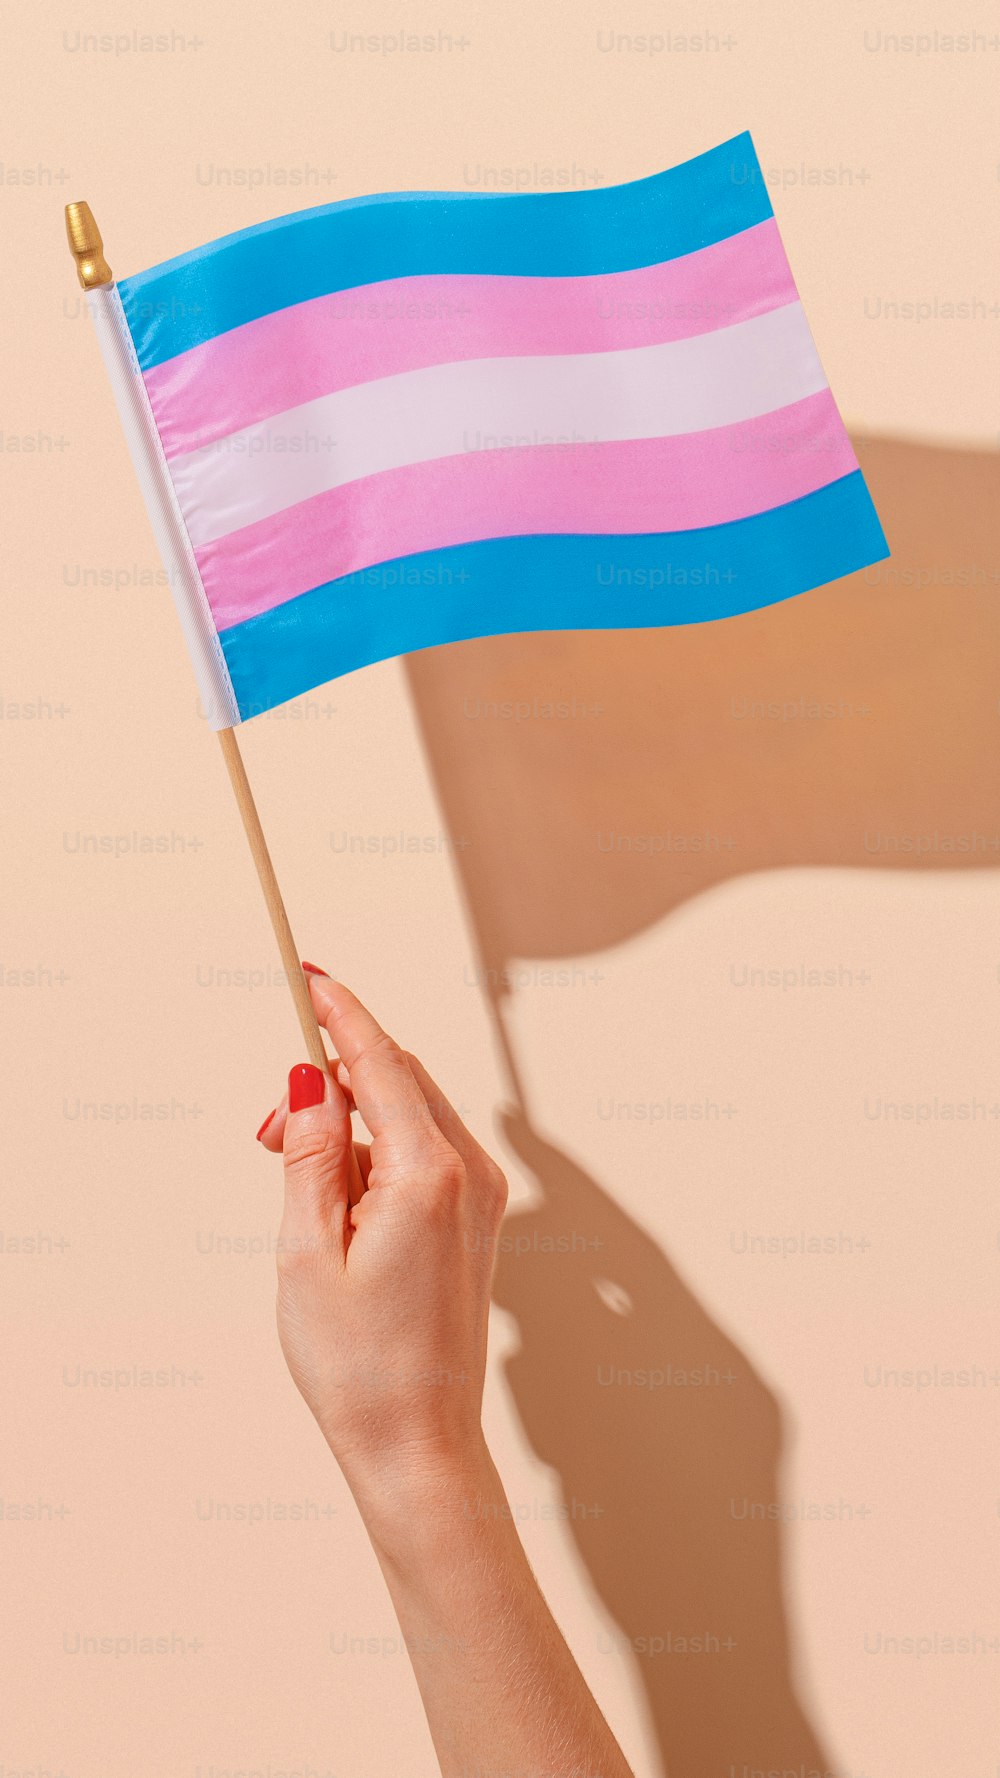 All about the Trans flag - HER